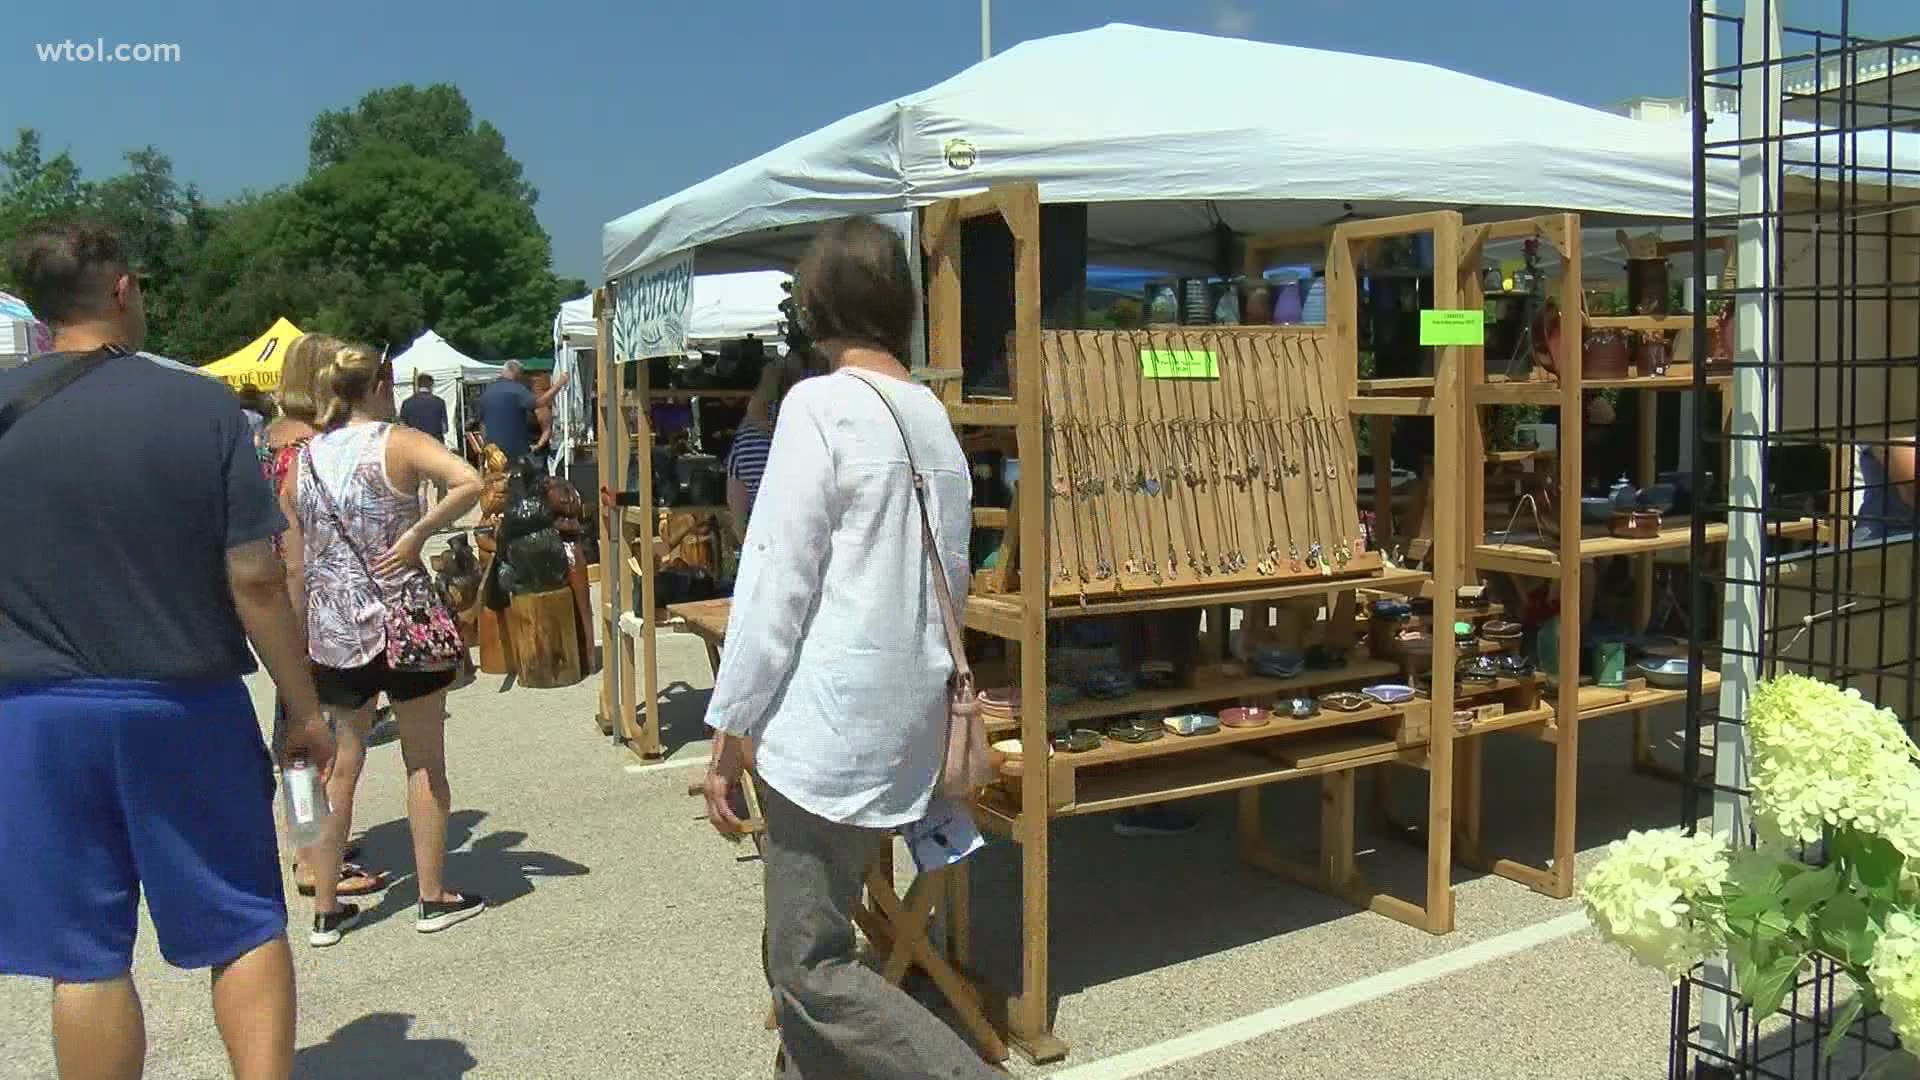 The arts and crafts show is back for its thirtieth year, after being canceled last year due to the pandemic.